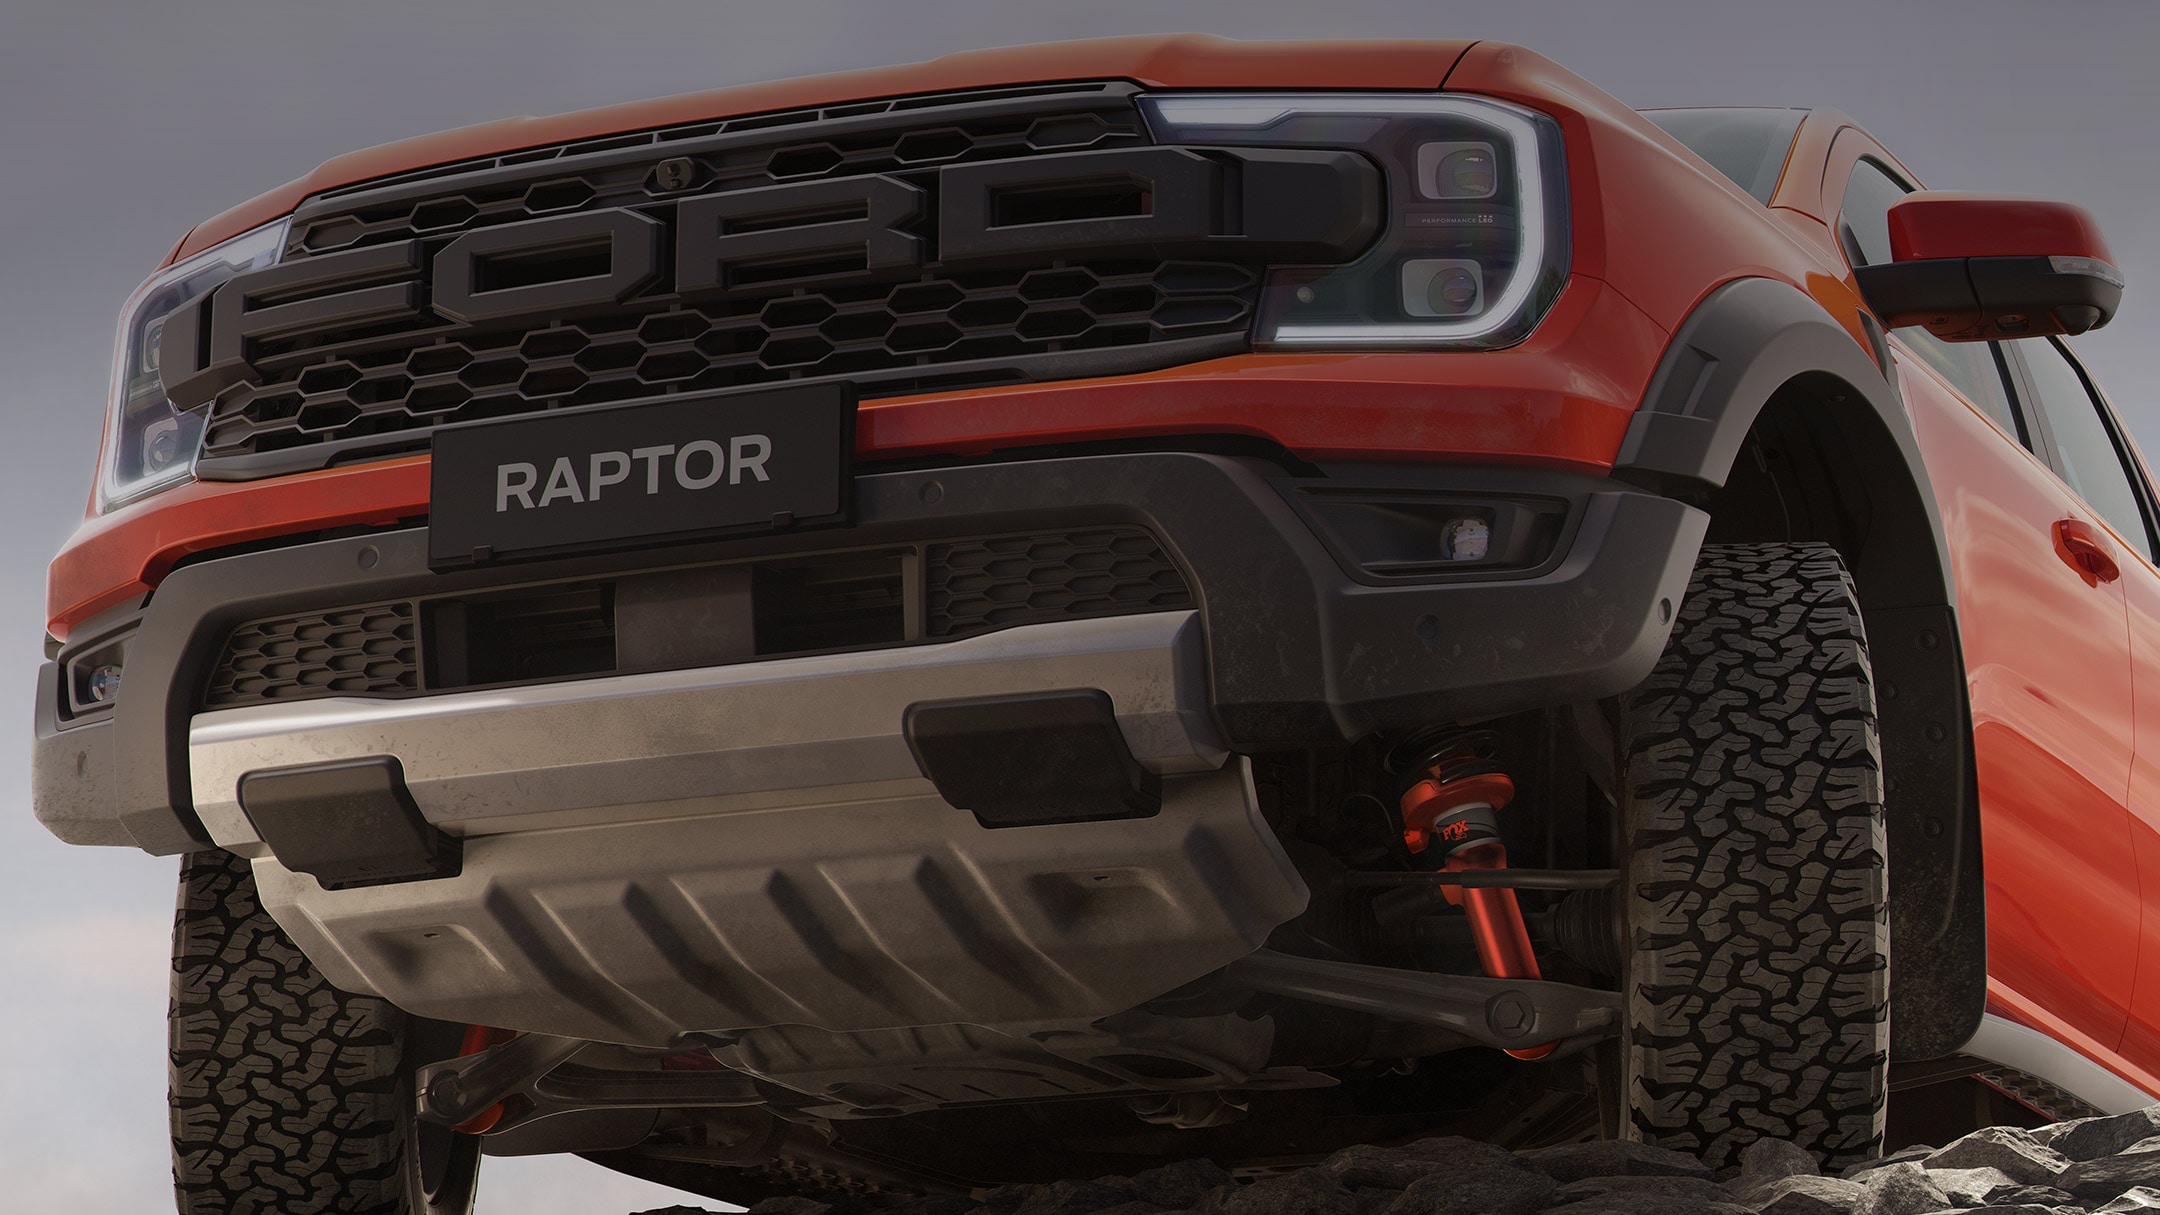 Ford Ranger Raptor front view from a low angle. 